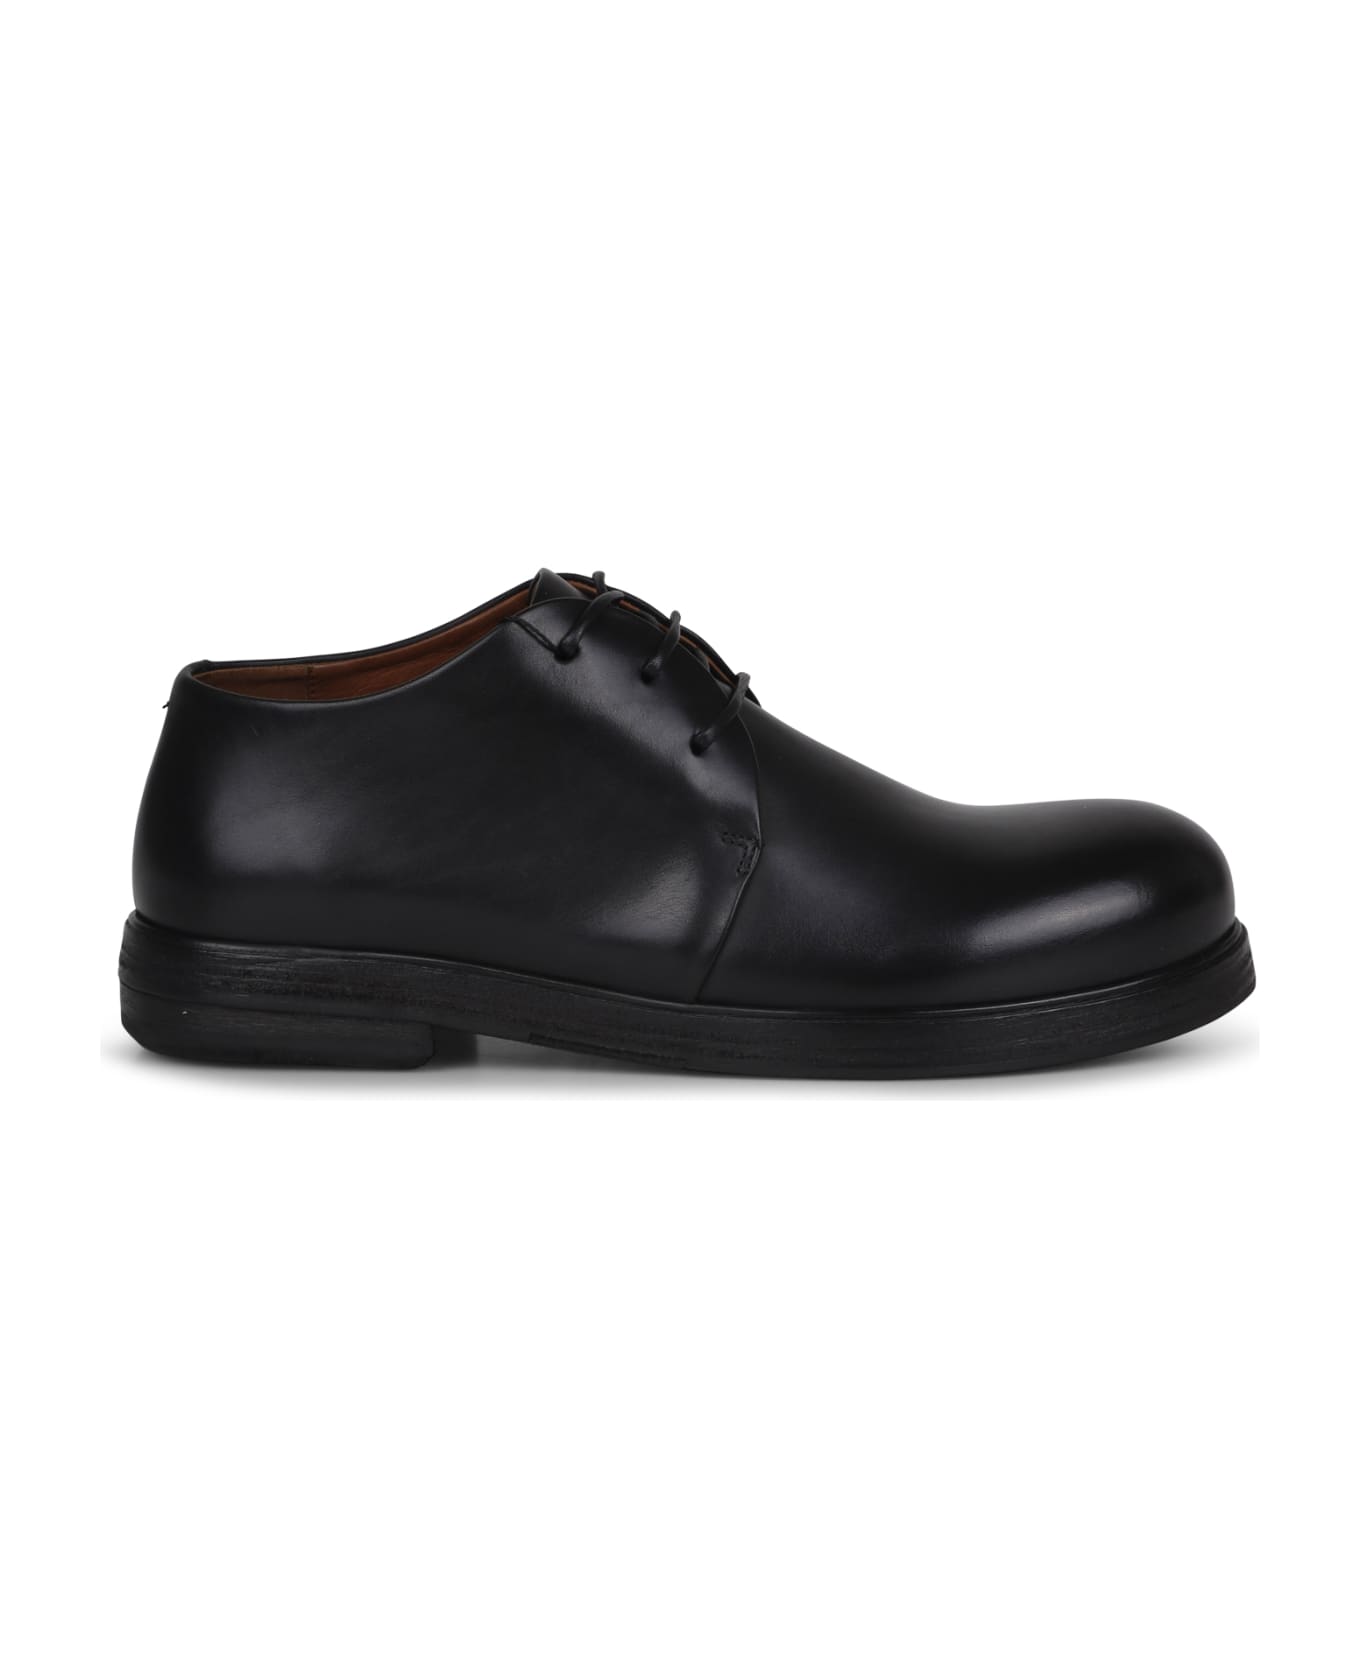 Marsell Zucca Leather Oxford Shoes フラットシューズ